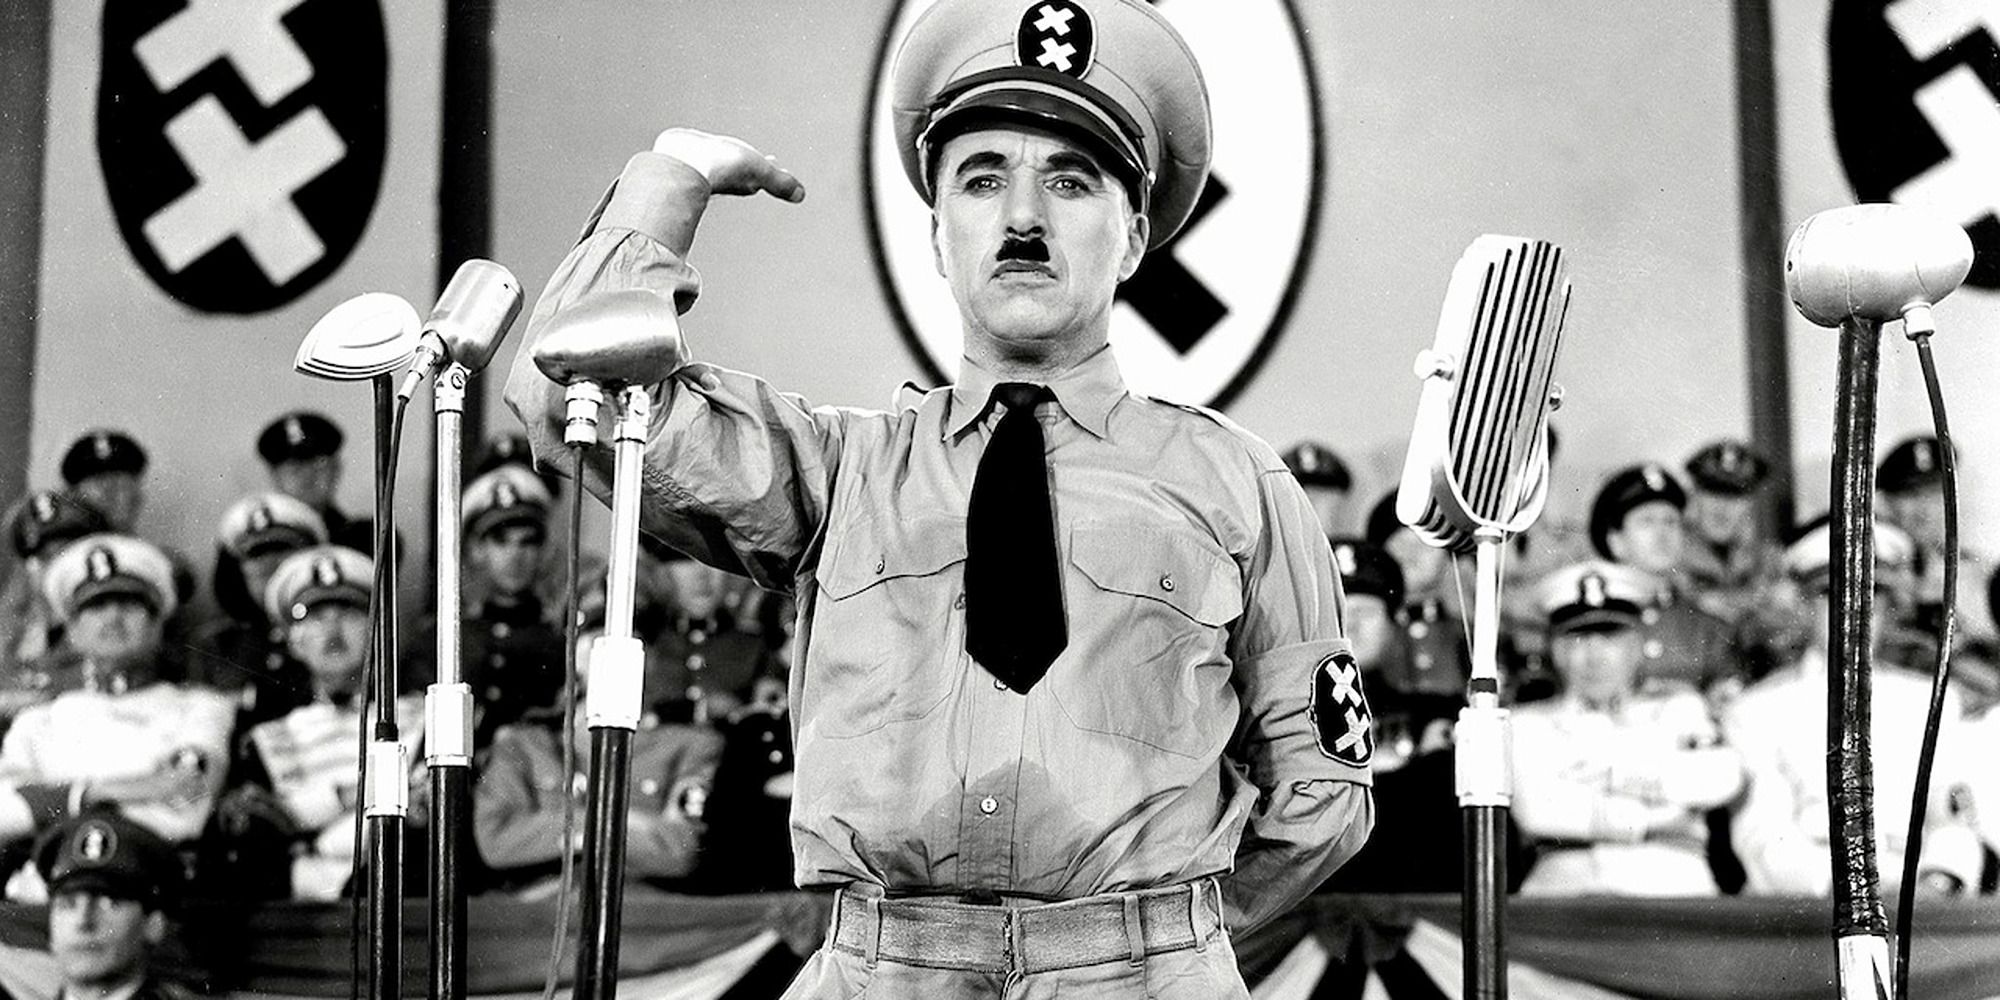 The Jewish barber dressed as the tyrant from The Great Dictator